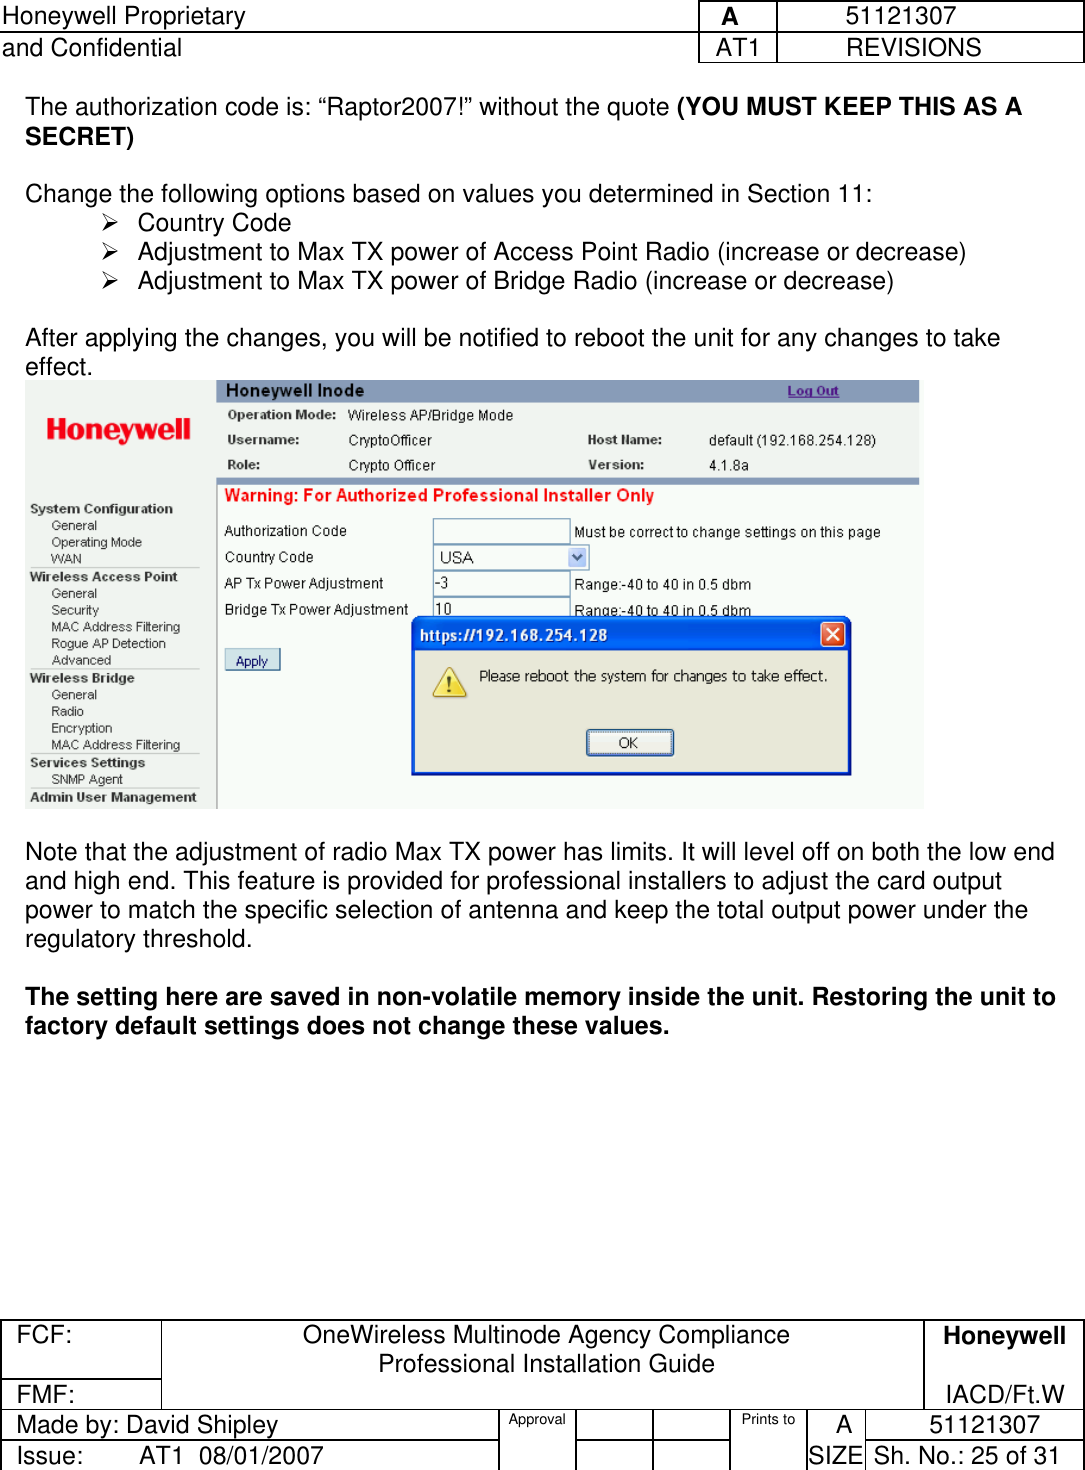 Honeywell Proprietary     A          51121307 and Confidential  AT1           REVISIONS  FCF:  OneWireless Multinode Agency Compliance Professional Installation Guide  Honeywell FMF:               IACD/Ft.W Made by: David Shipley  Approval   Prints to     A           51121307 Issue:        AT1  08/01/2007          SIZE  Sh. No.: 25 of 31  The authorization code is: “Raptor2007!” without the quote (YOU MUST KEEP THIS AS A SECRET)  Change the following options based on values you determined in Section 11:    Country Code  Adjustment to Max TX power of Access Point Radio (increase or decrease)  Adjustment to Max TX power of Bridge Radio (increase or decrease)  After applying the changes, you will be notified to reboot the unit for any changes to take effect.   Note that the adjustment of radio Max TX power has limits. It will level off on both the low end and high end. This feature is provided for professional installers to adjust the card output power to match the specific selection of antenna and keep the total output power under the regulatory threshold.  The setting here are saved in non-volatile memory inside the unit. Restoring the unit to factory default settings does not change these values.  